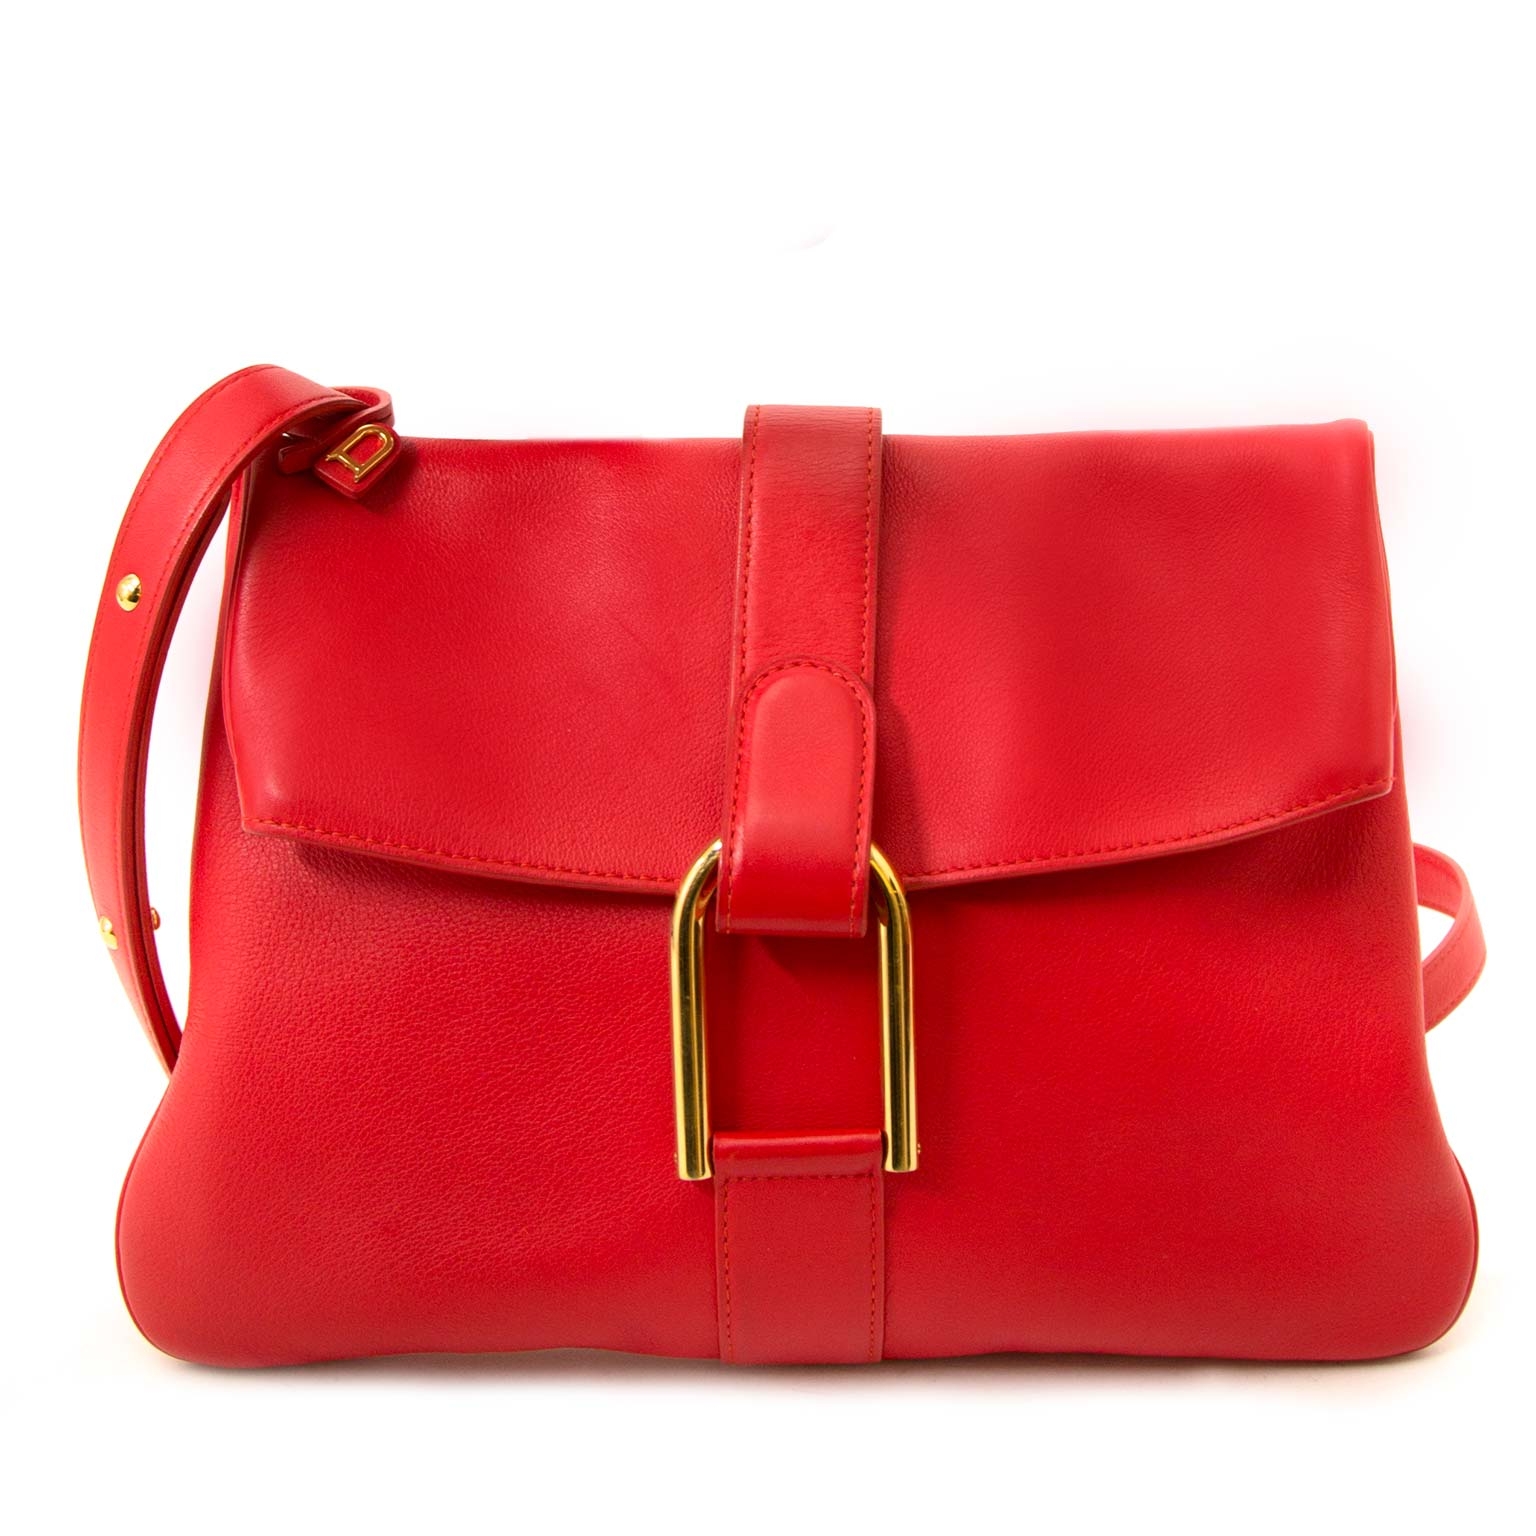 Delvaux 'Givry' Red Cross Body Bag